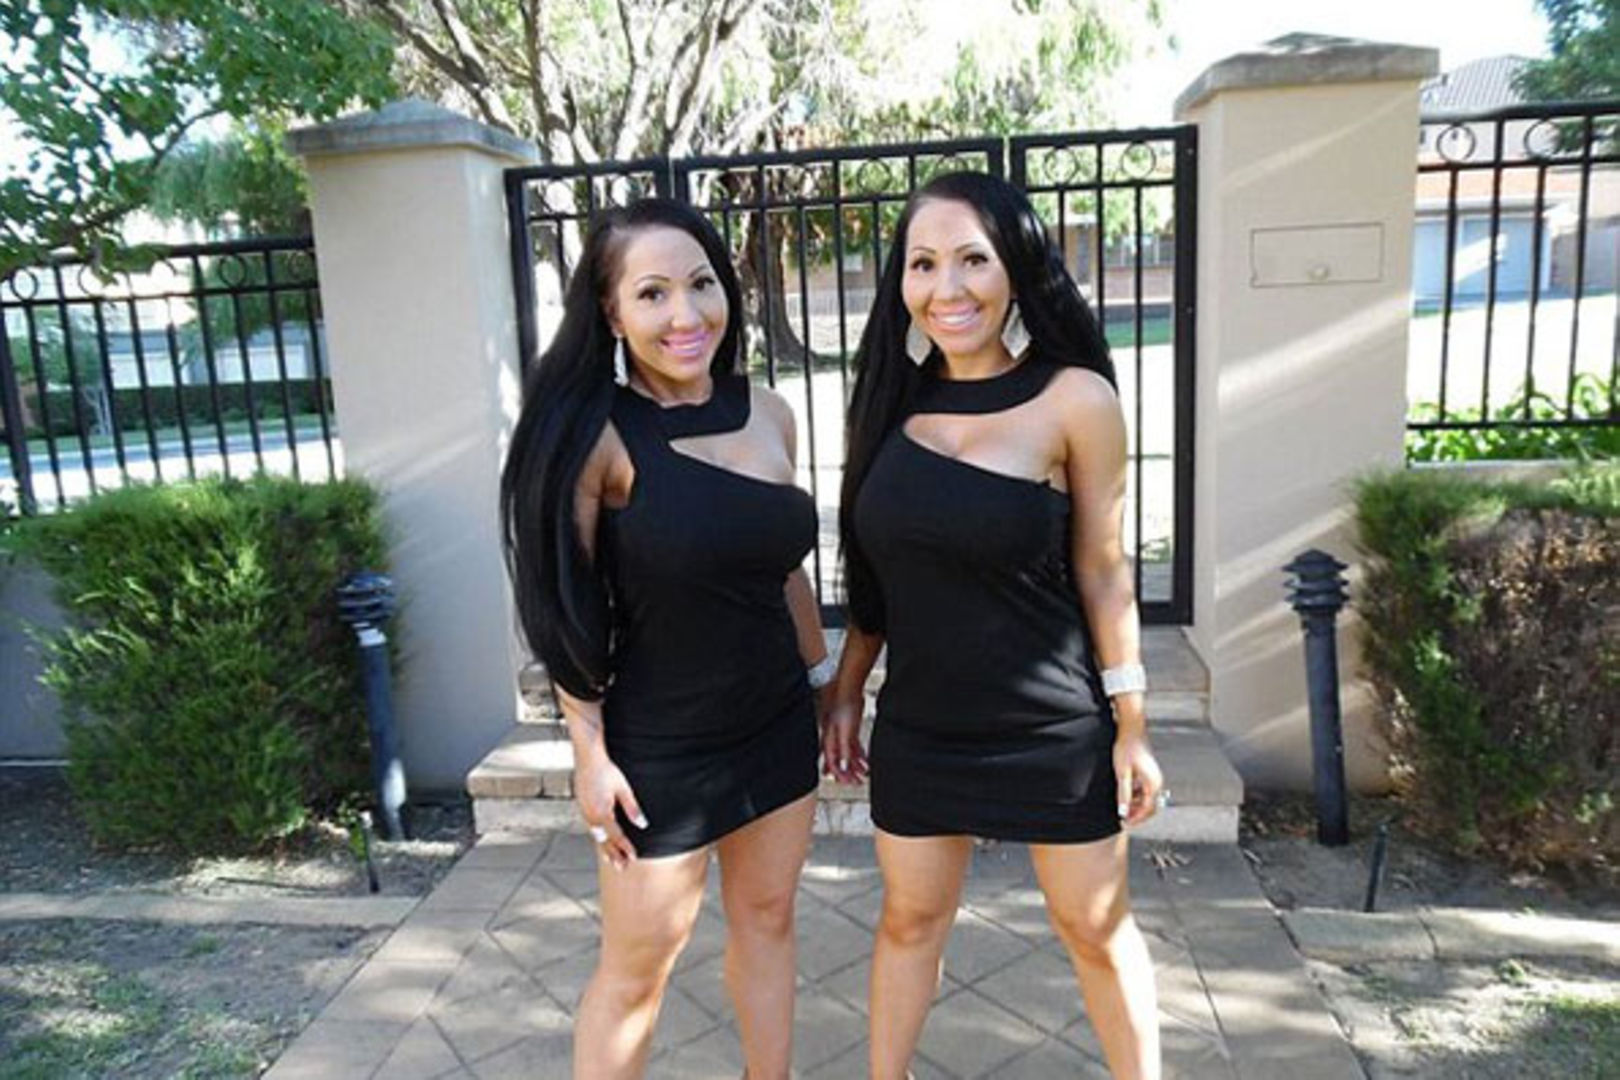 World's most identical twins share everything including boyfriend